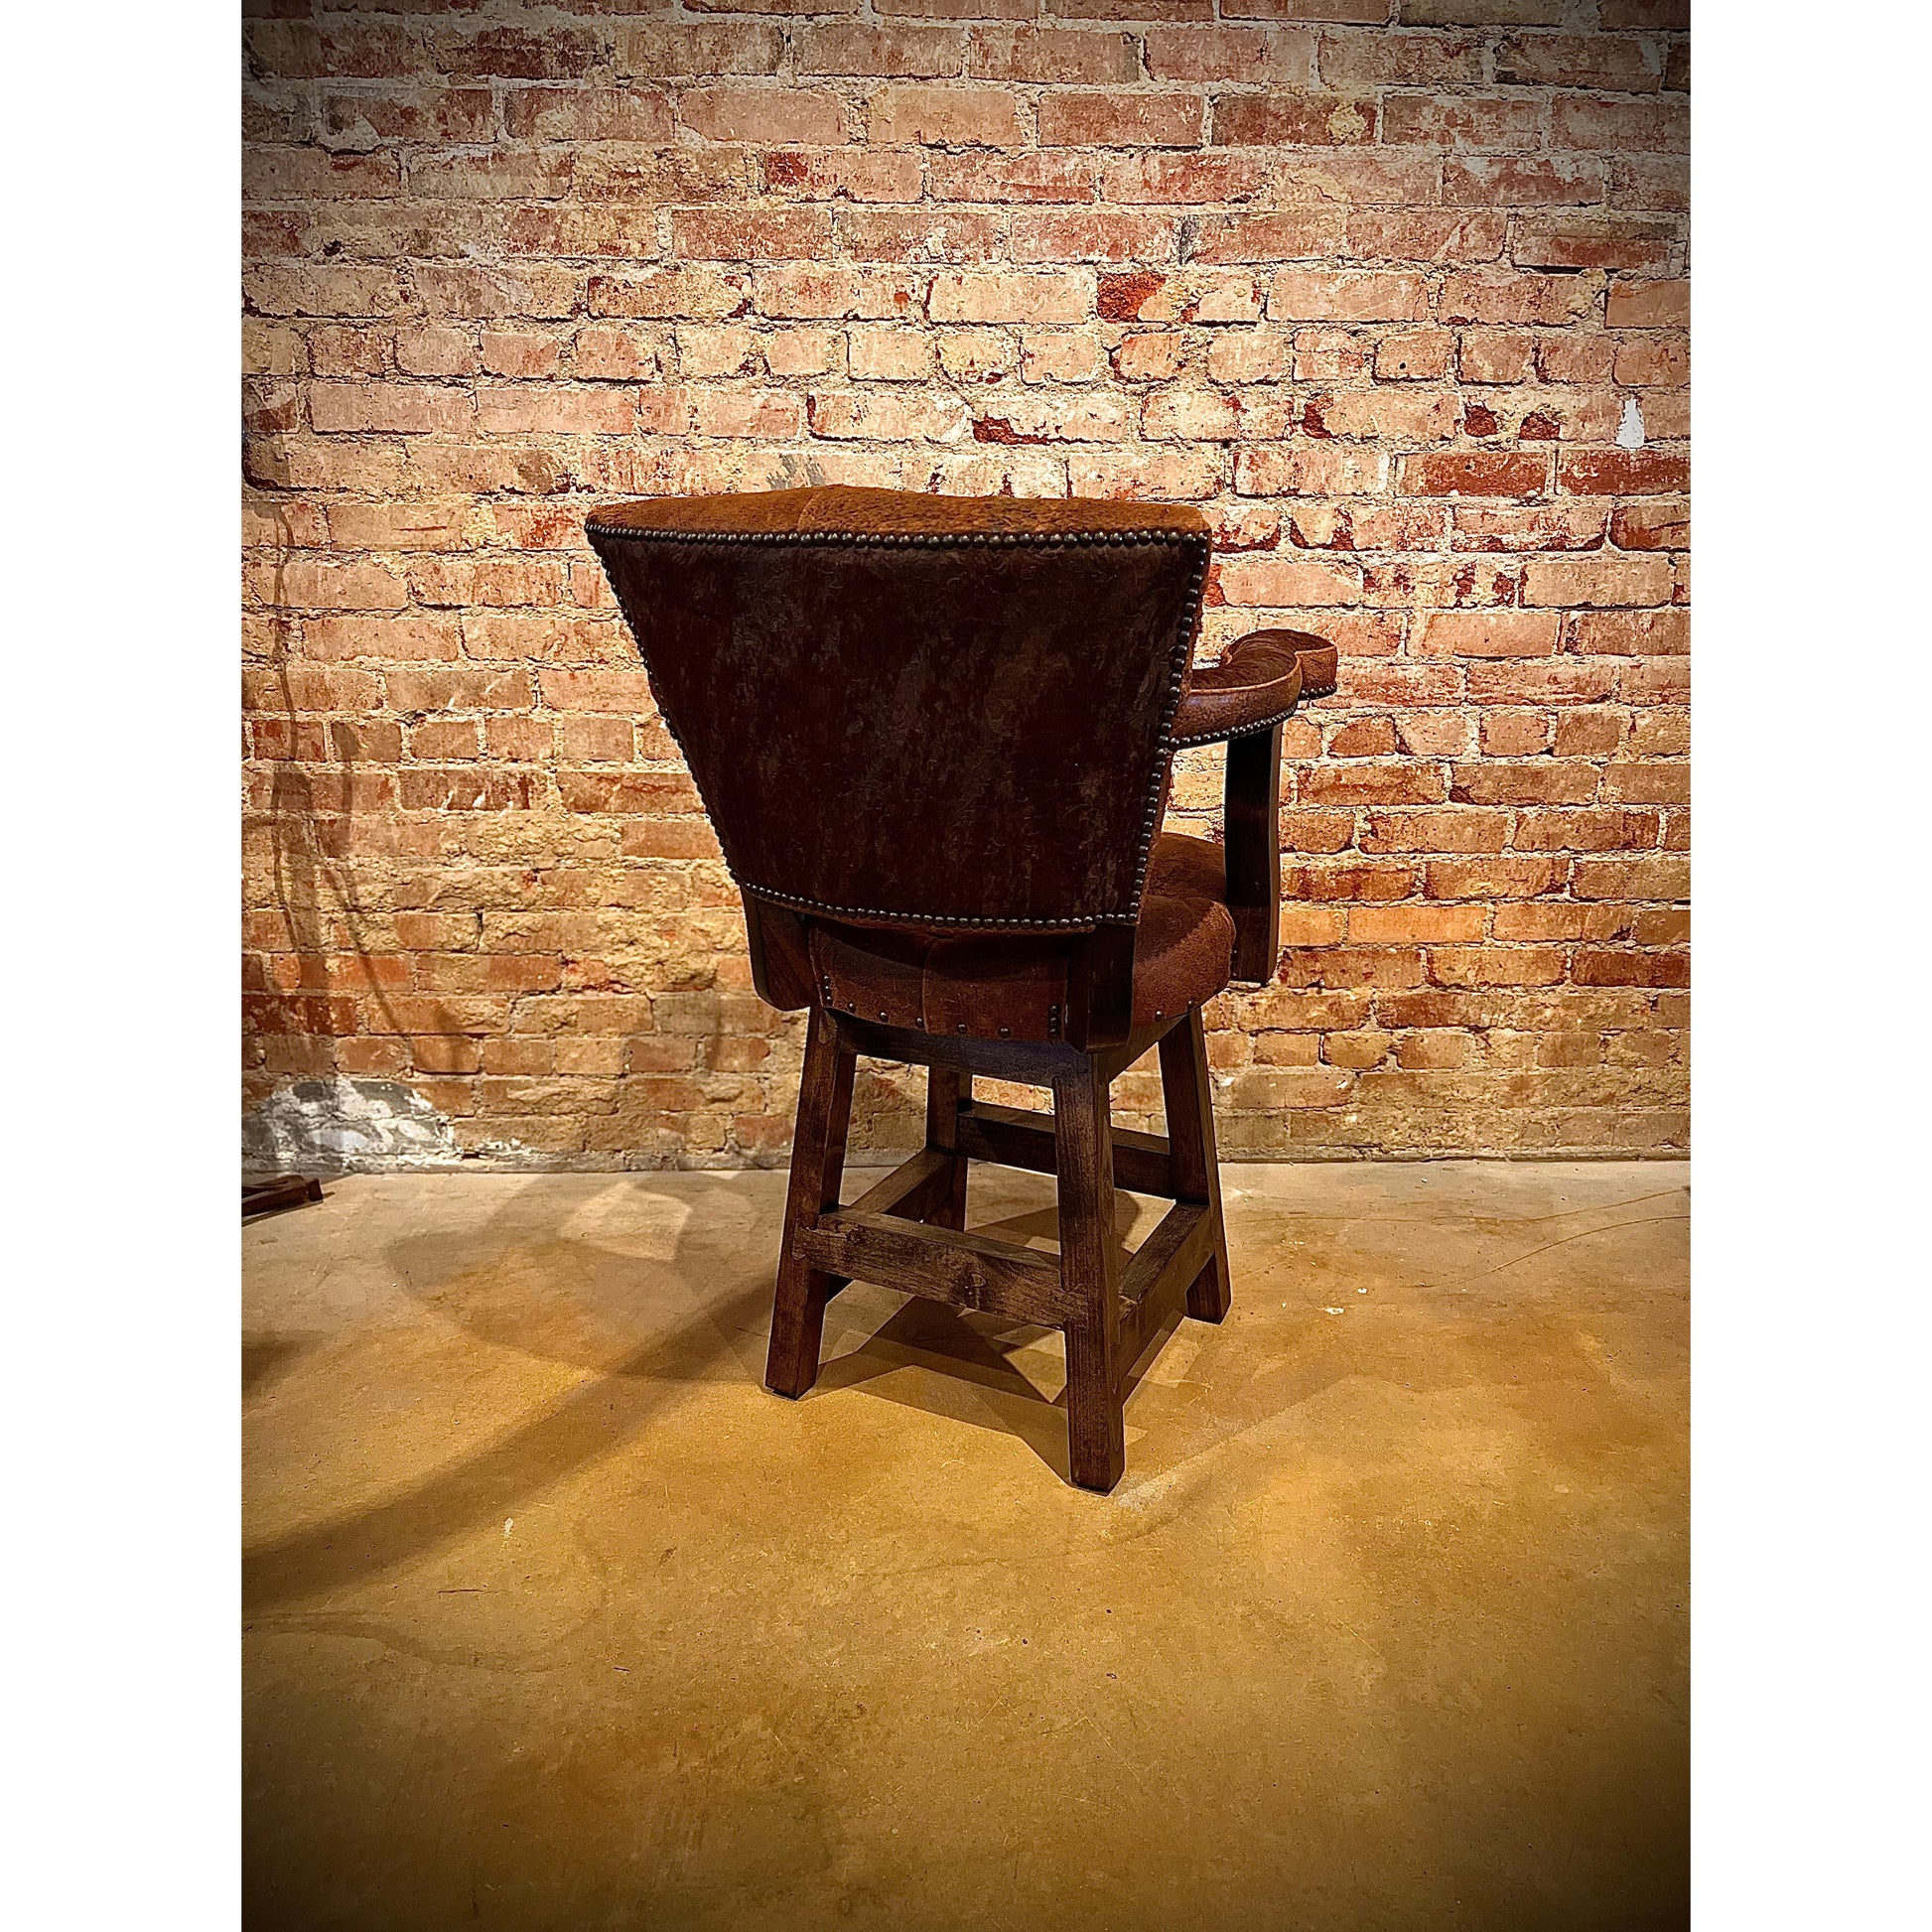 This Rough Out leather swivel barstool offers a comfortable and stylish seating option with its western design. Expertly crafted with high-quality leather, this barstool provides both durability and comfort. Perfect for any bar or kitchen counter, it adds a touch of rustic charm to any space.